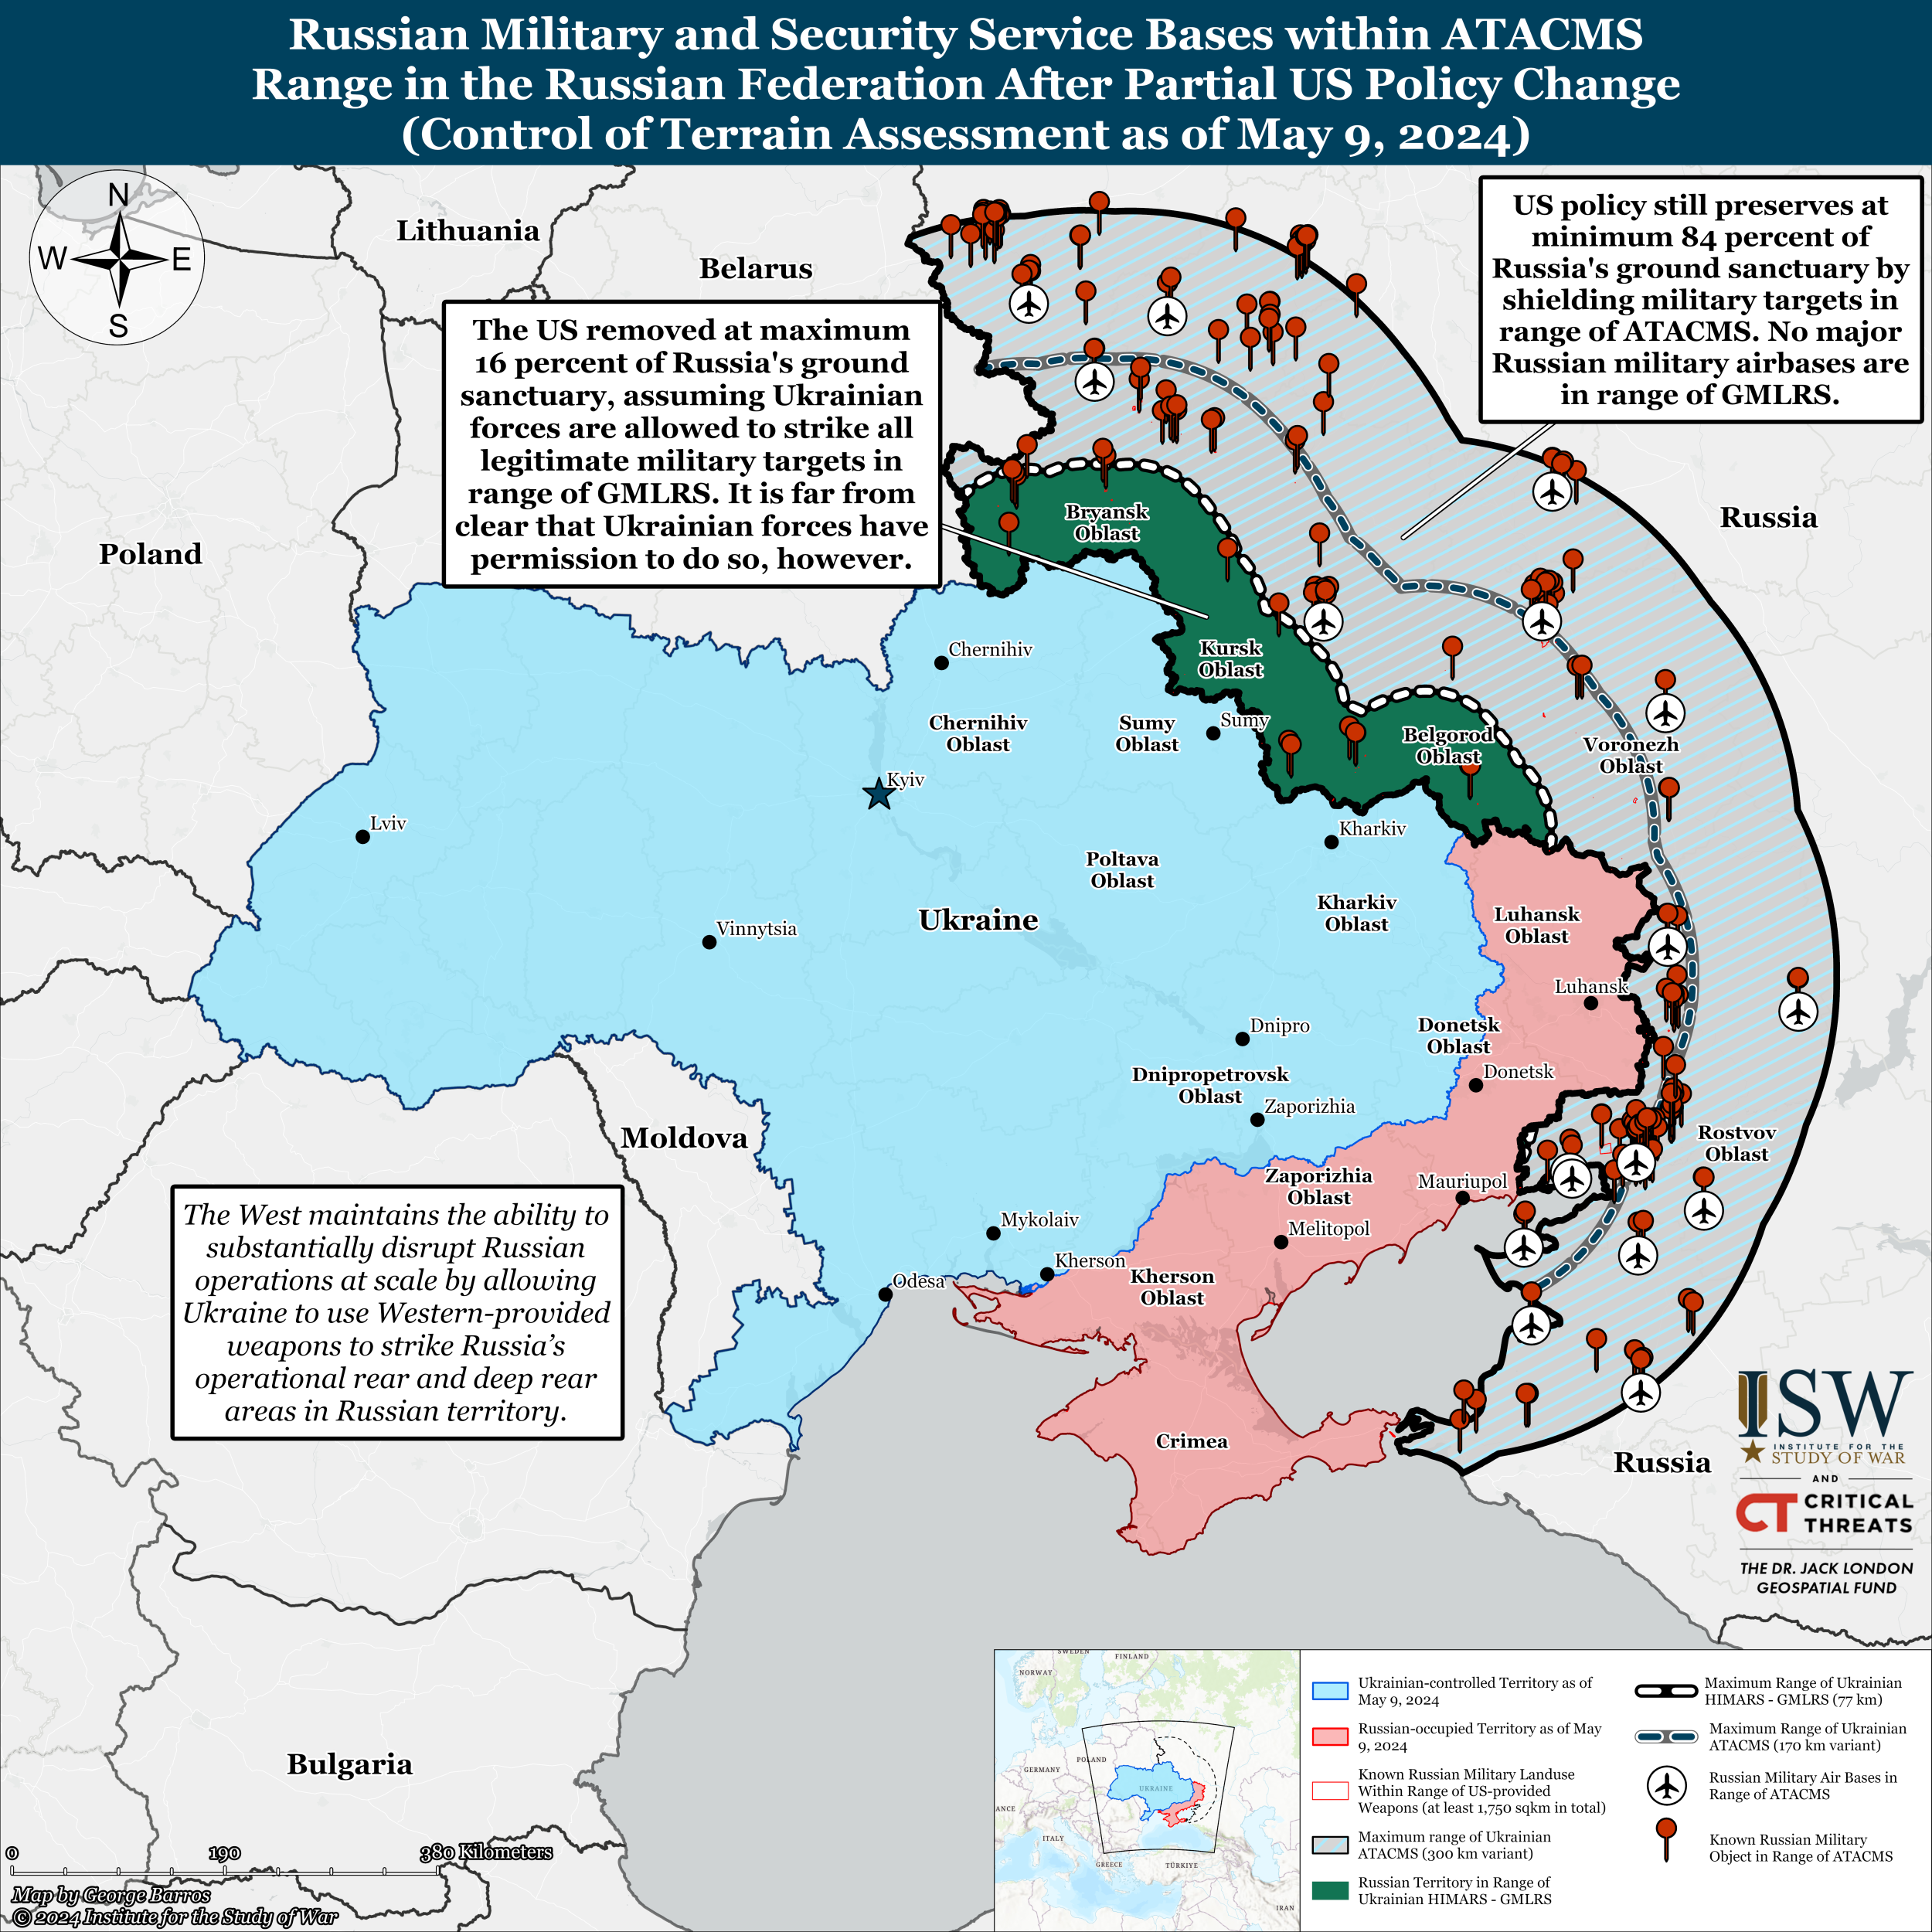 War map shows all Russian military bases within ATACMS attack range